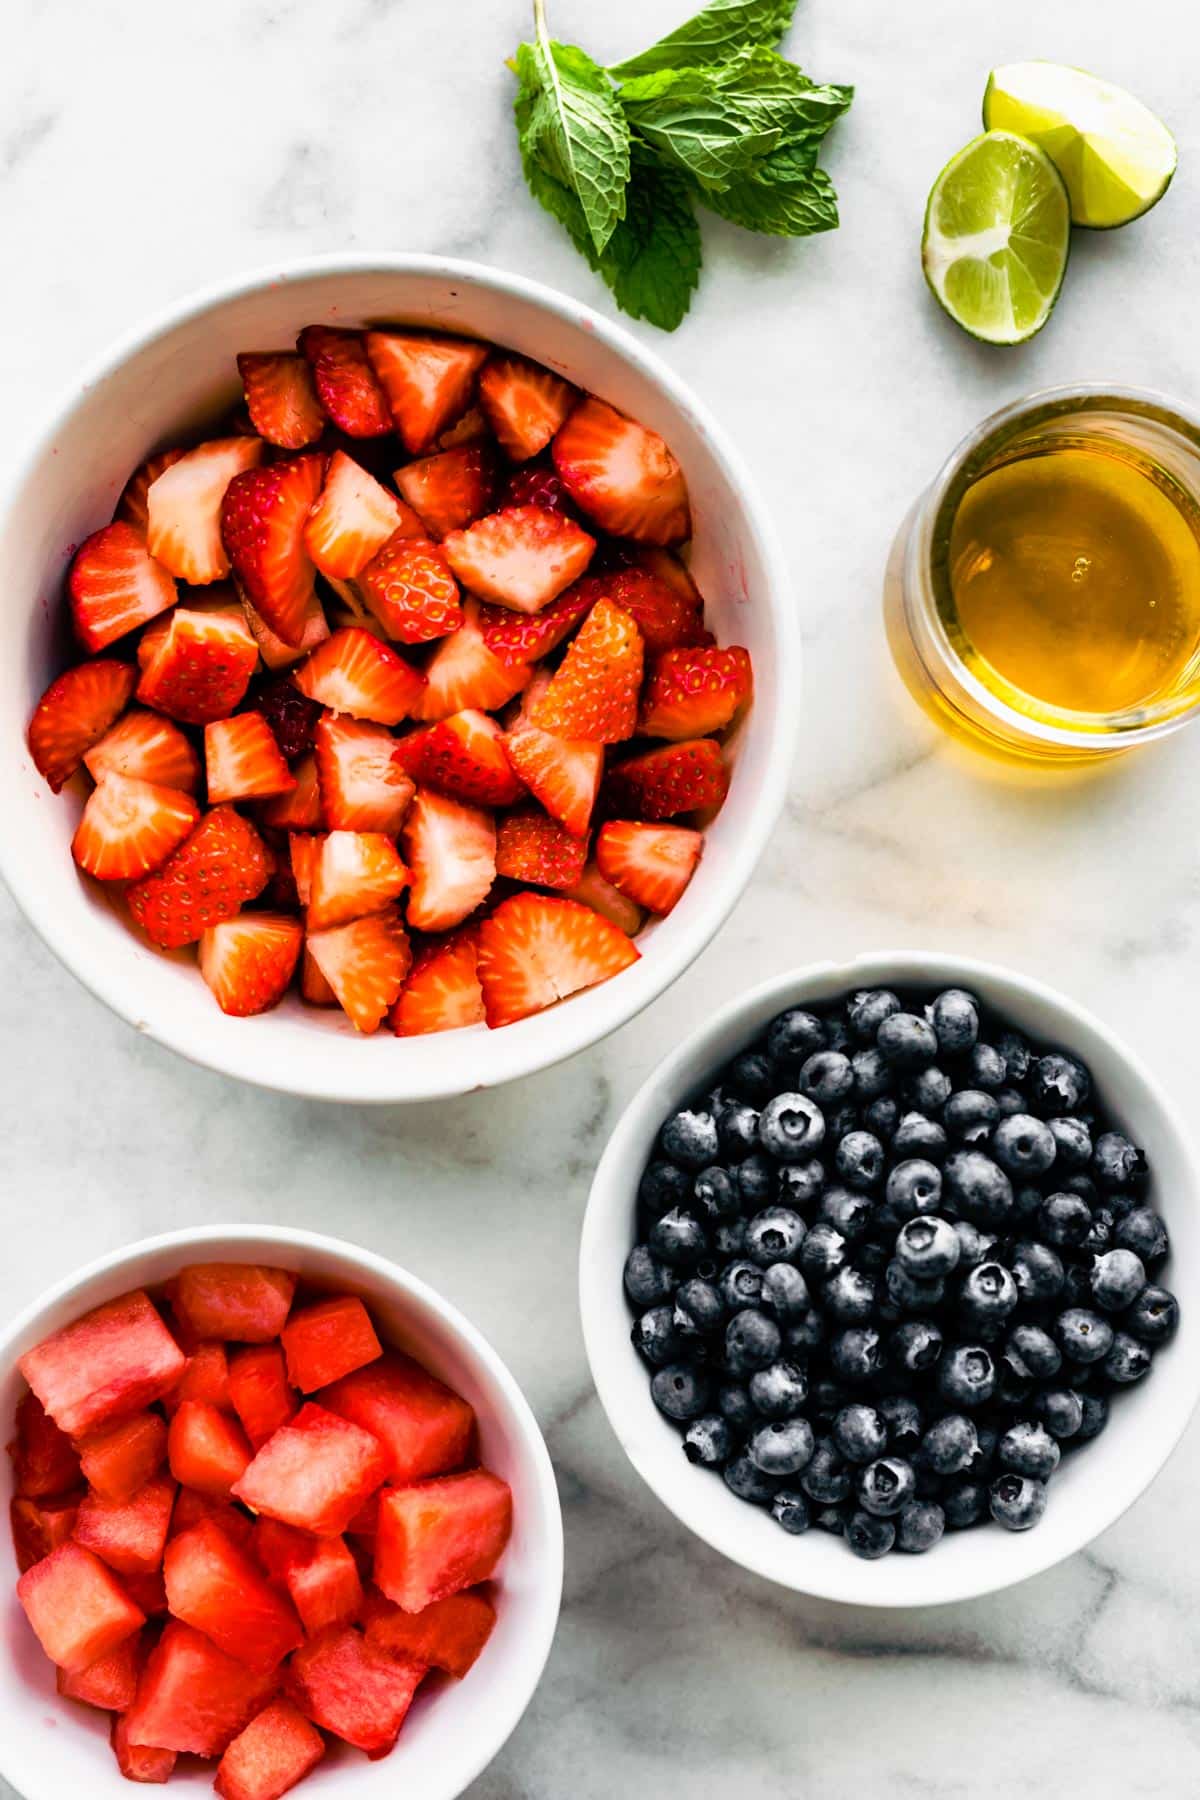 Ingredients to make a fresh summer berry salad including fruit, honey, limes, and herbs.